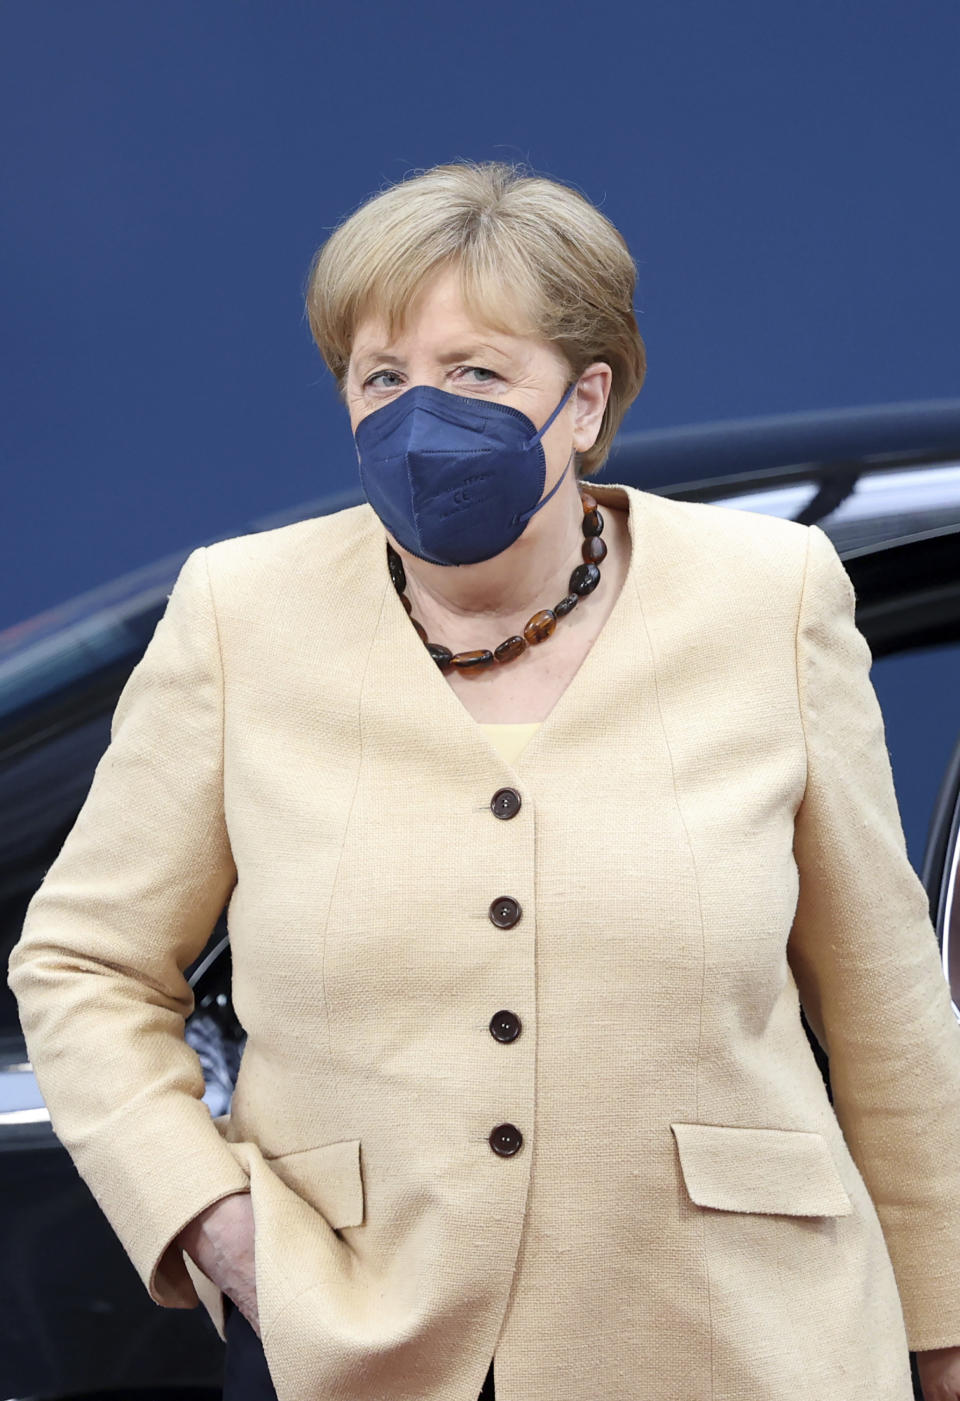 German Chancellor Angela Merkel arrives for an EU summit at the European Council building in Brussels, Friday, June 25, 2021. EU leaders are discussing the economic challenges the bloc faces due to coronavirus restrictions and will review progress on their banking union and capital markets union. (Aris Oikonomou, Pool Photo via AP)